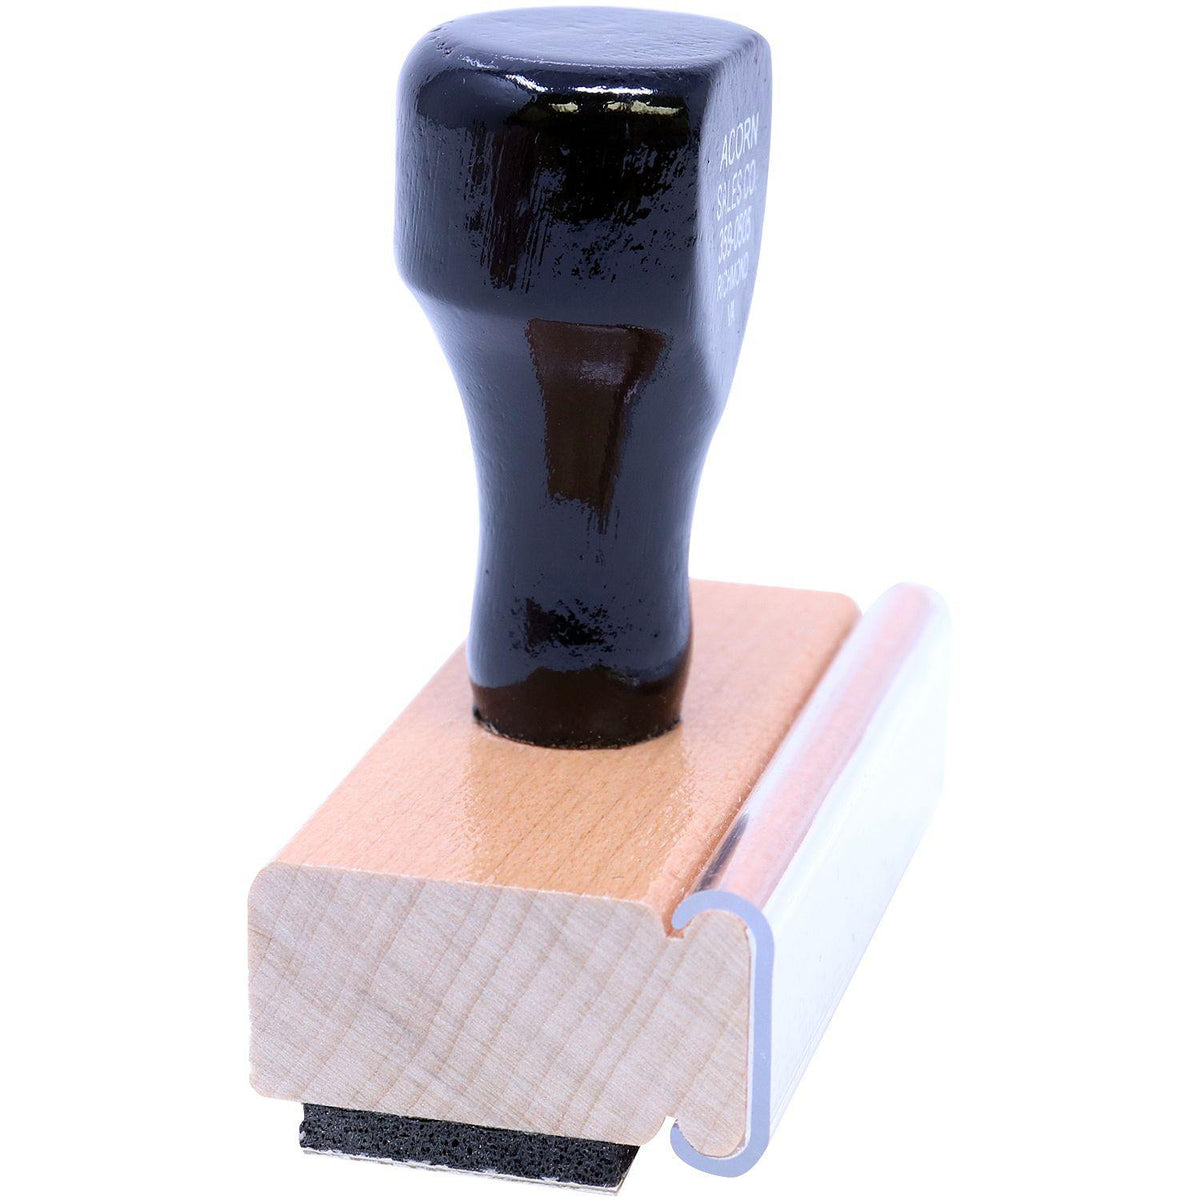 Side View of Large Cash Only Rubber Stamp at an Angle